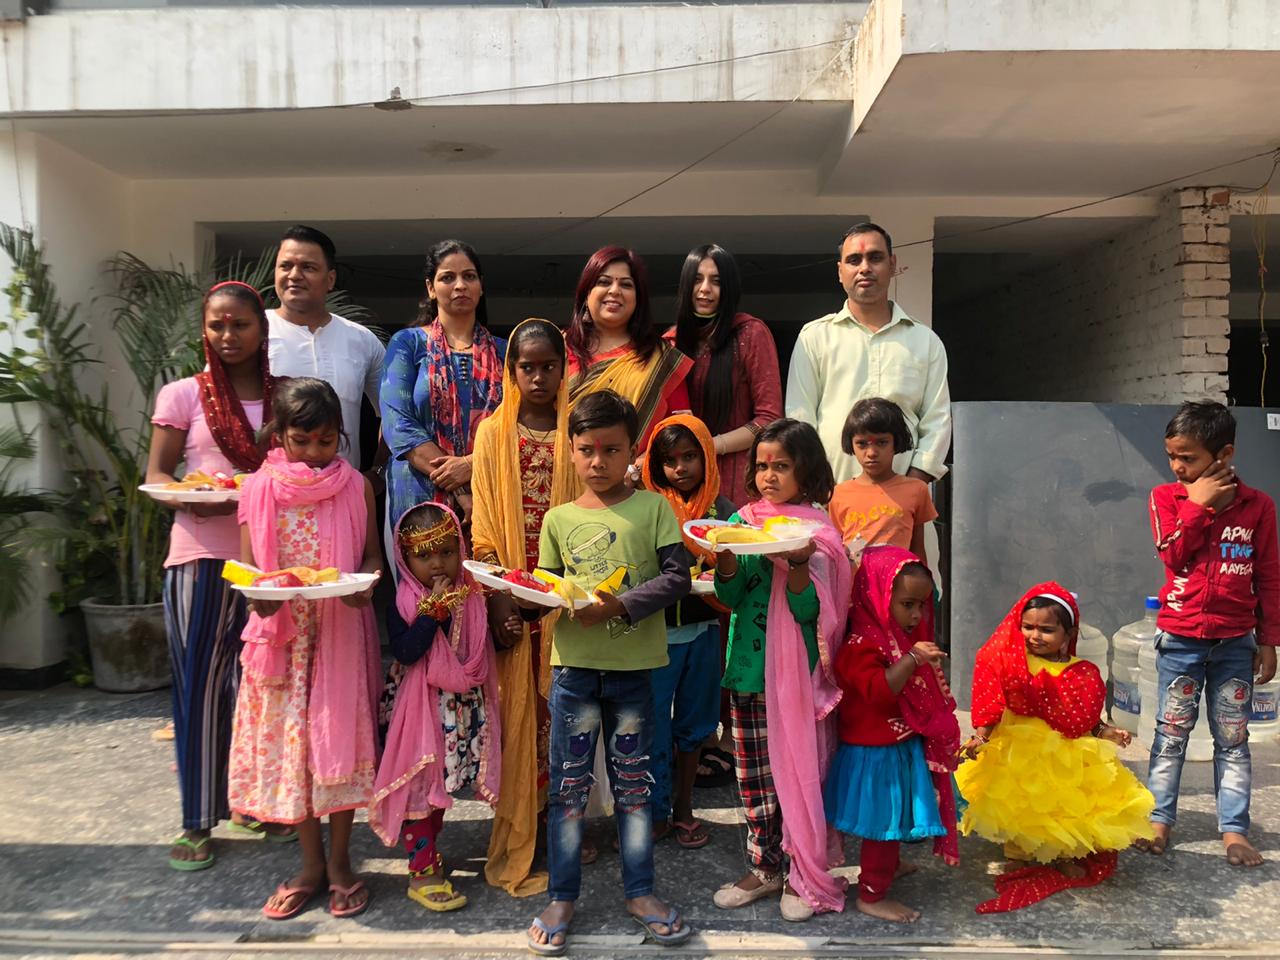 Building Bright Futures: Join Hands with Sandhya Singh for Kids' Safety and Education in Dwarka